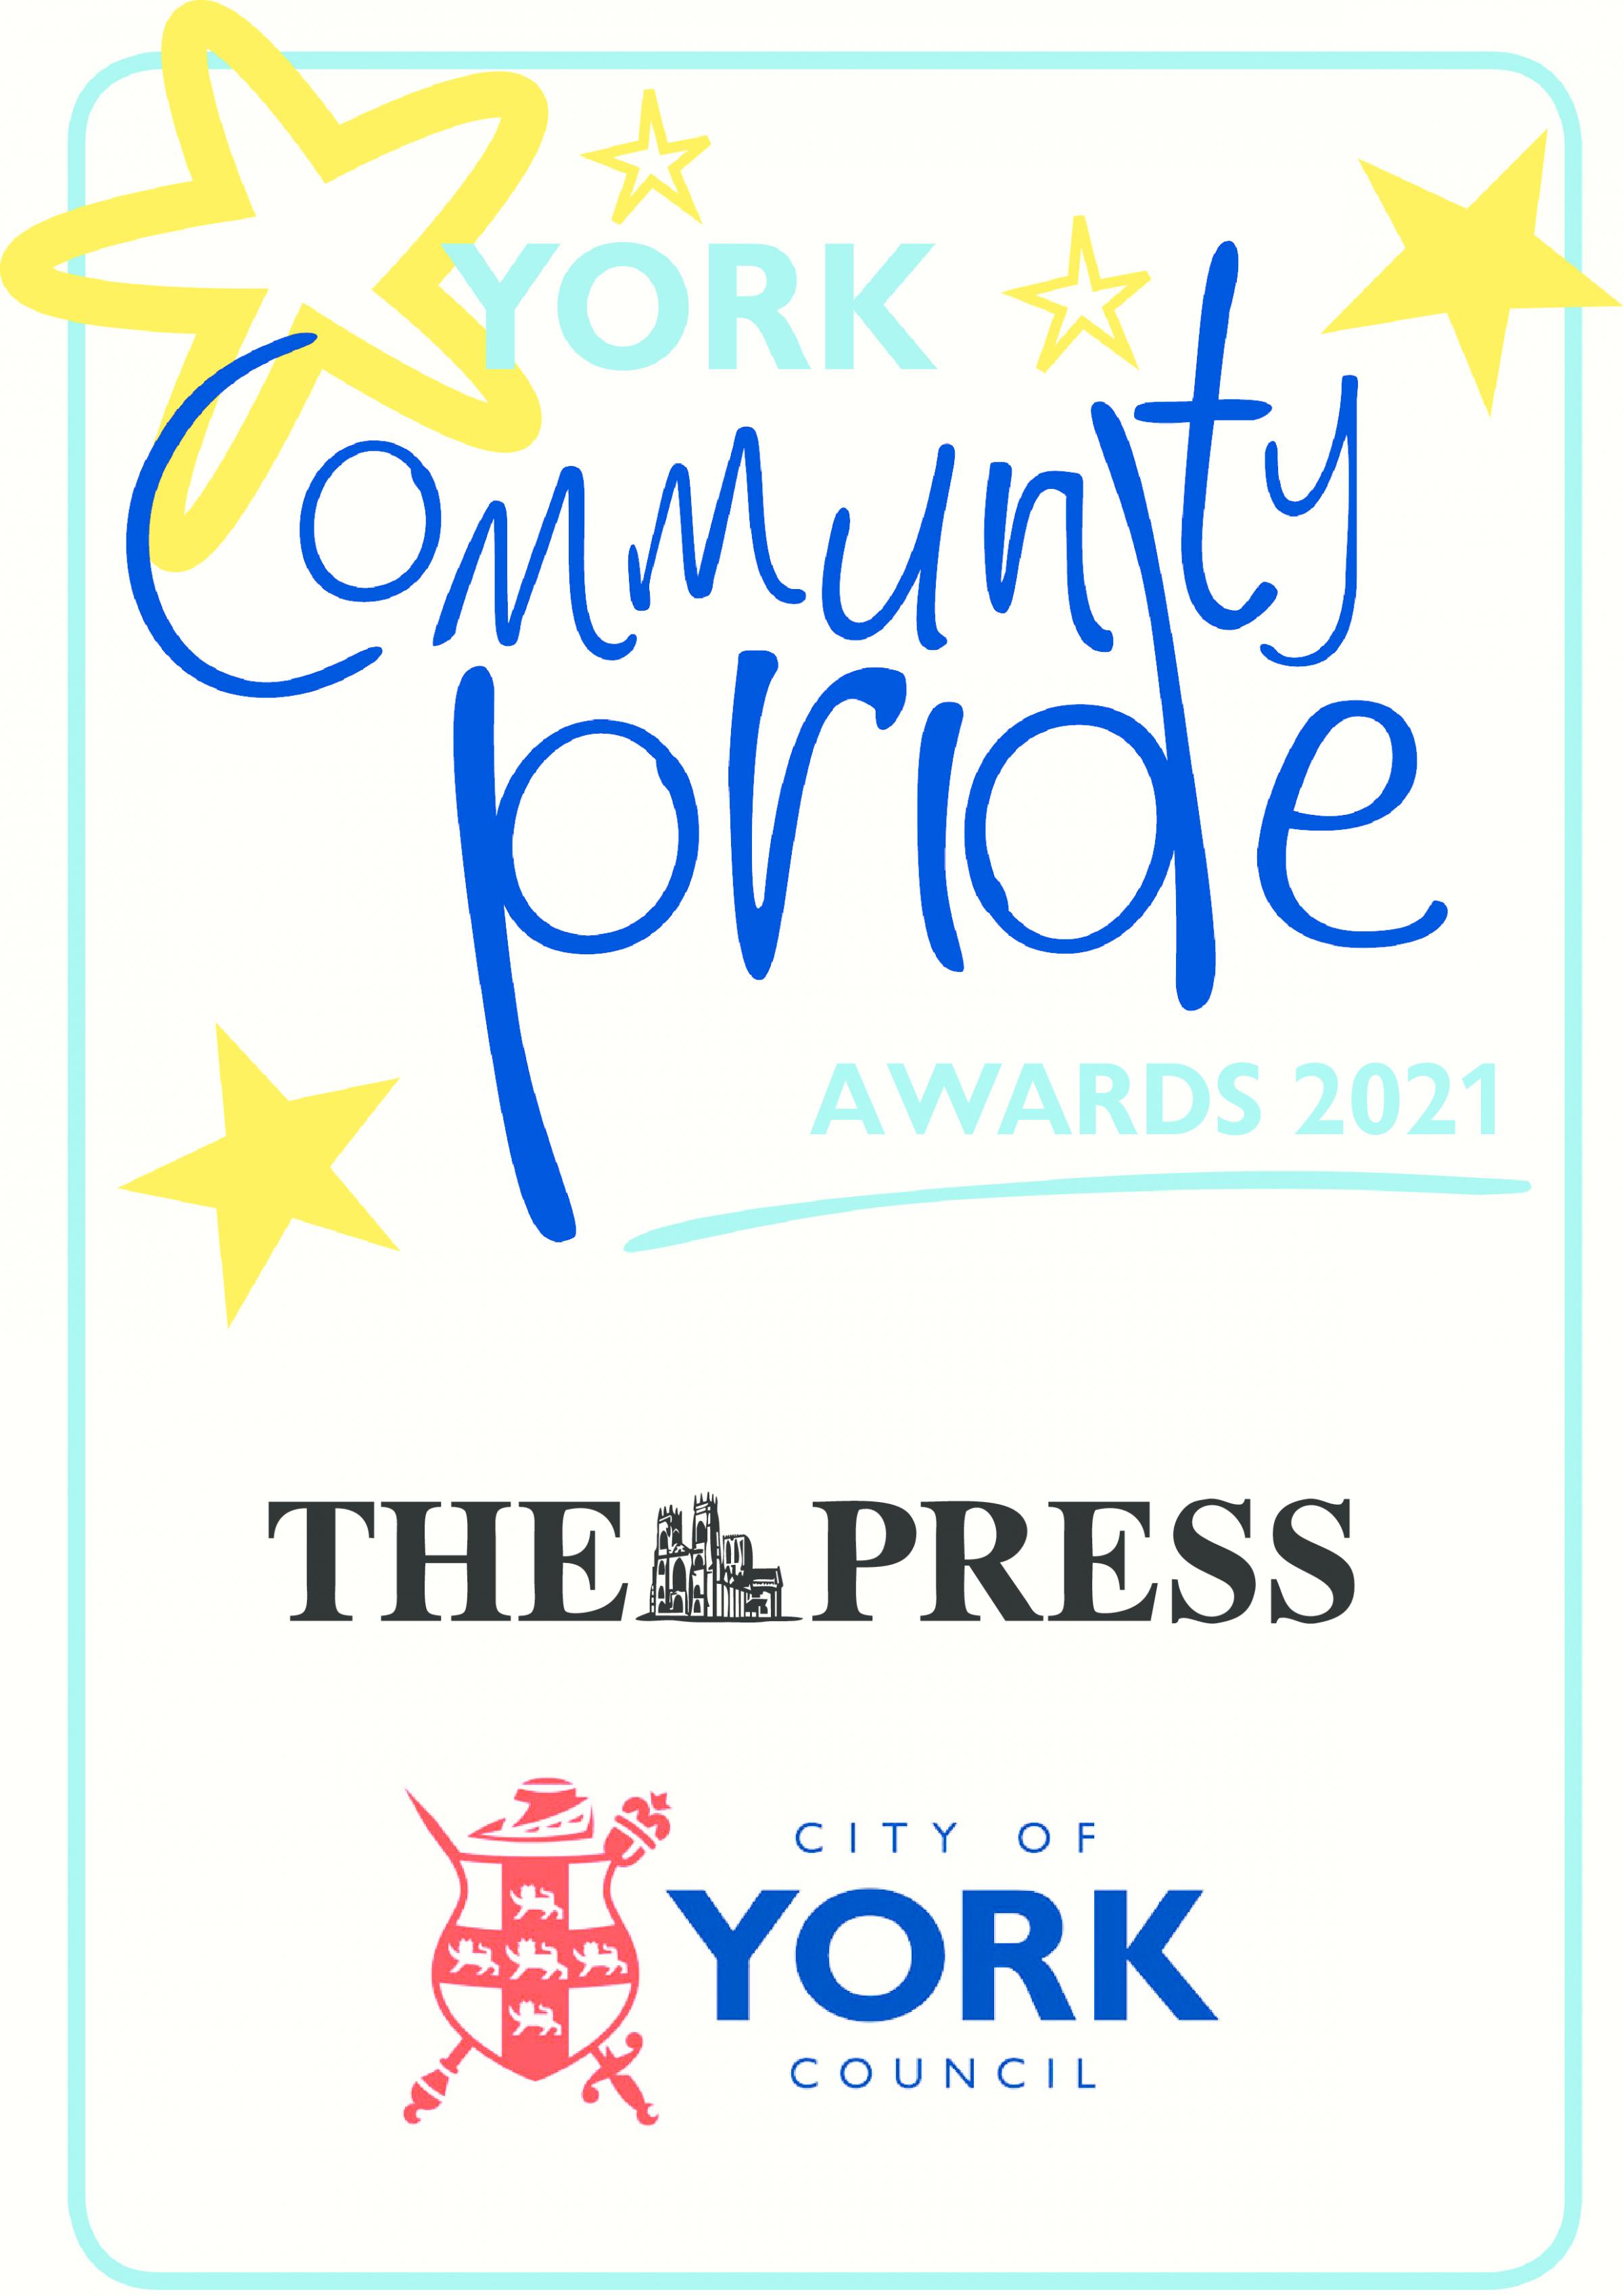 York Press: York Community Pride Awards 2021, supported by City of York Council